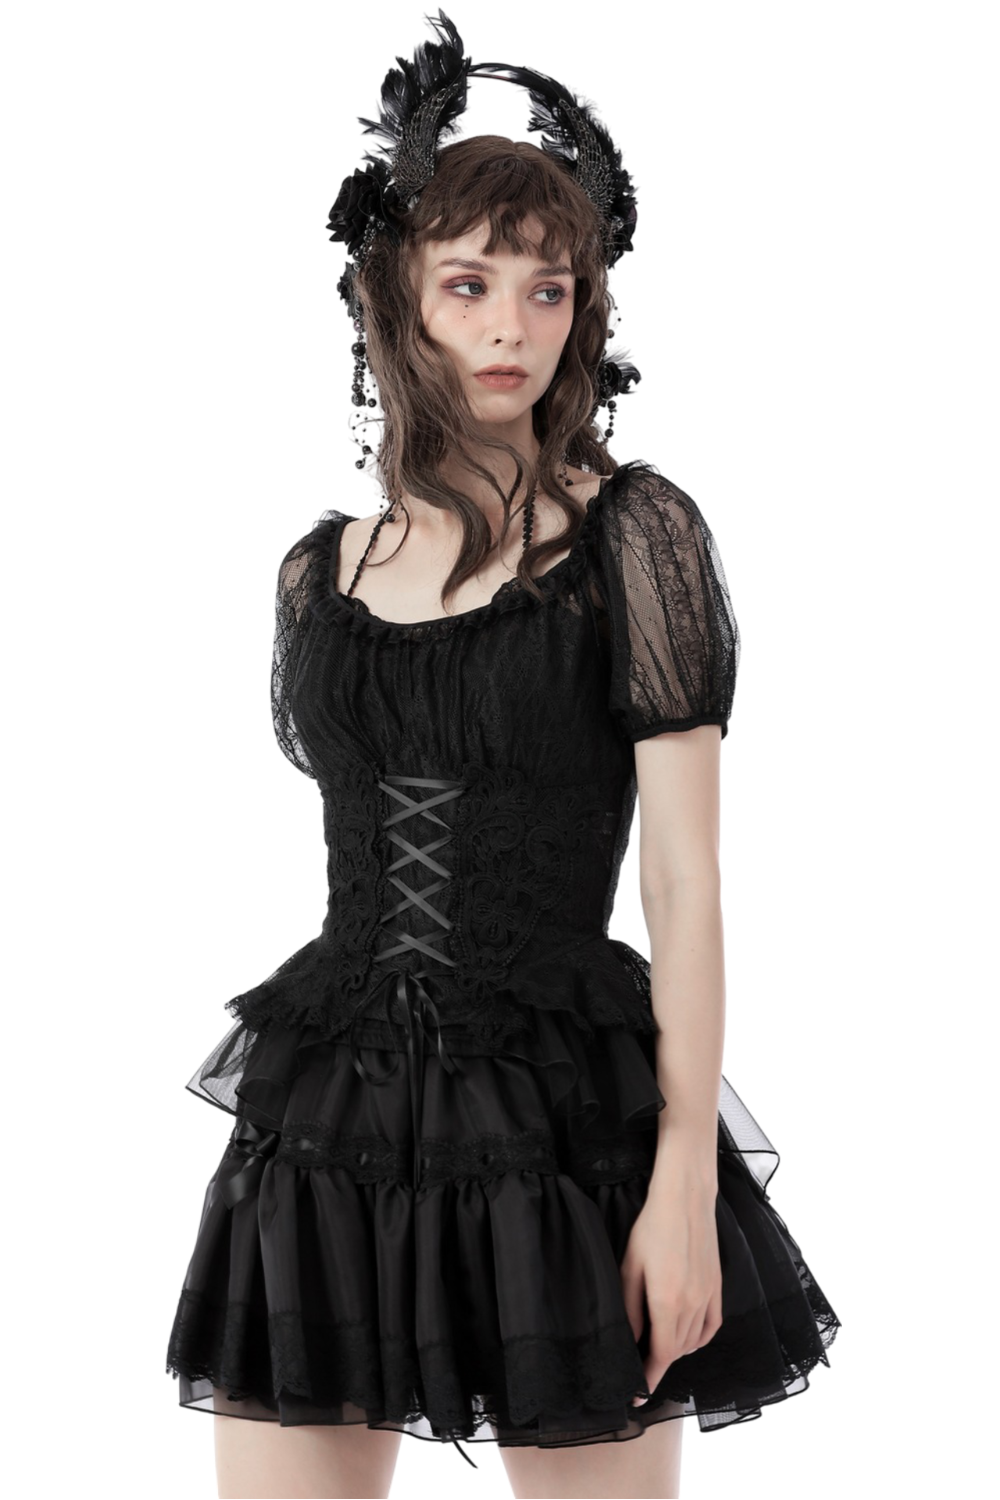 Gothic Female Sheer Black Lace Top with Puff Sleeves